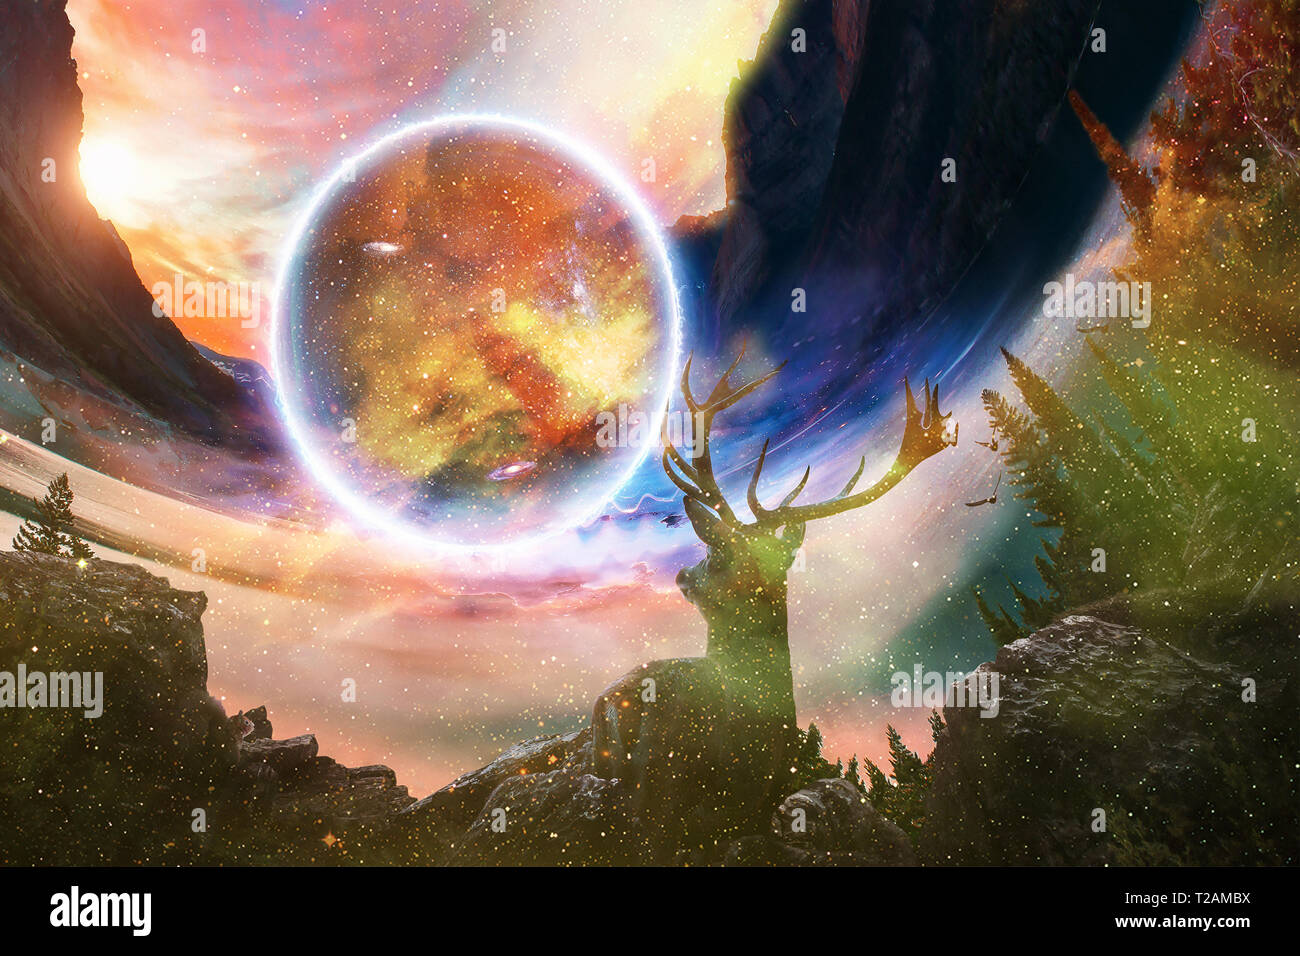 Beautiful Young Dreamy Deer On Dramatic Starry Galaxy Background